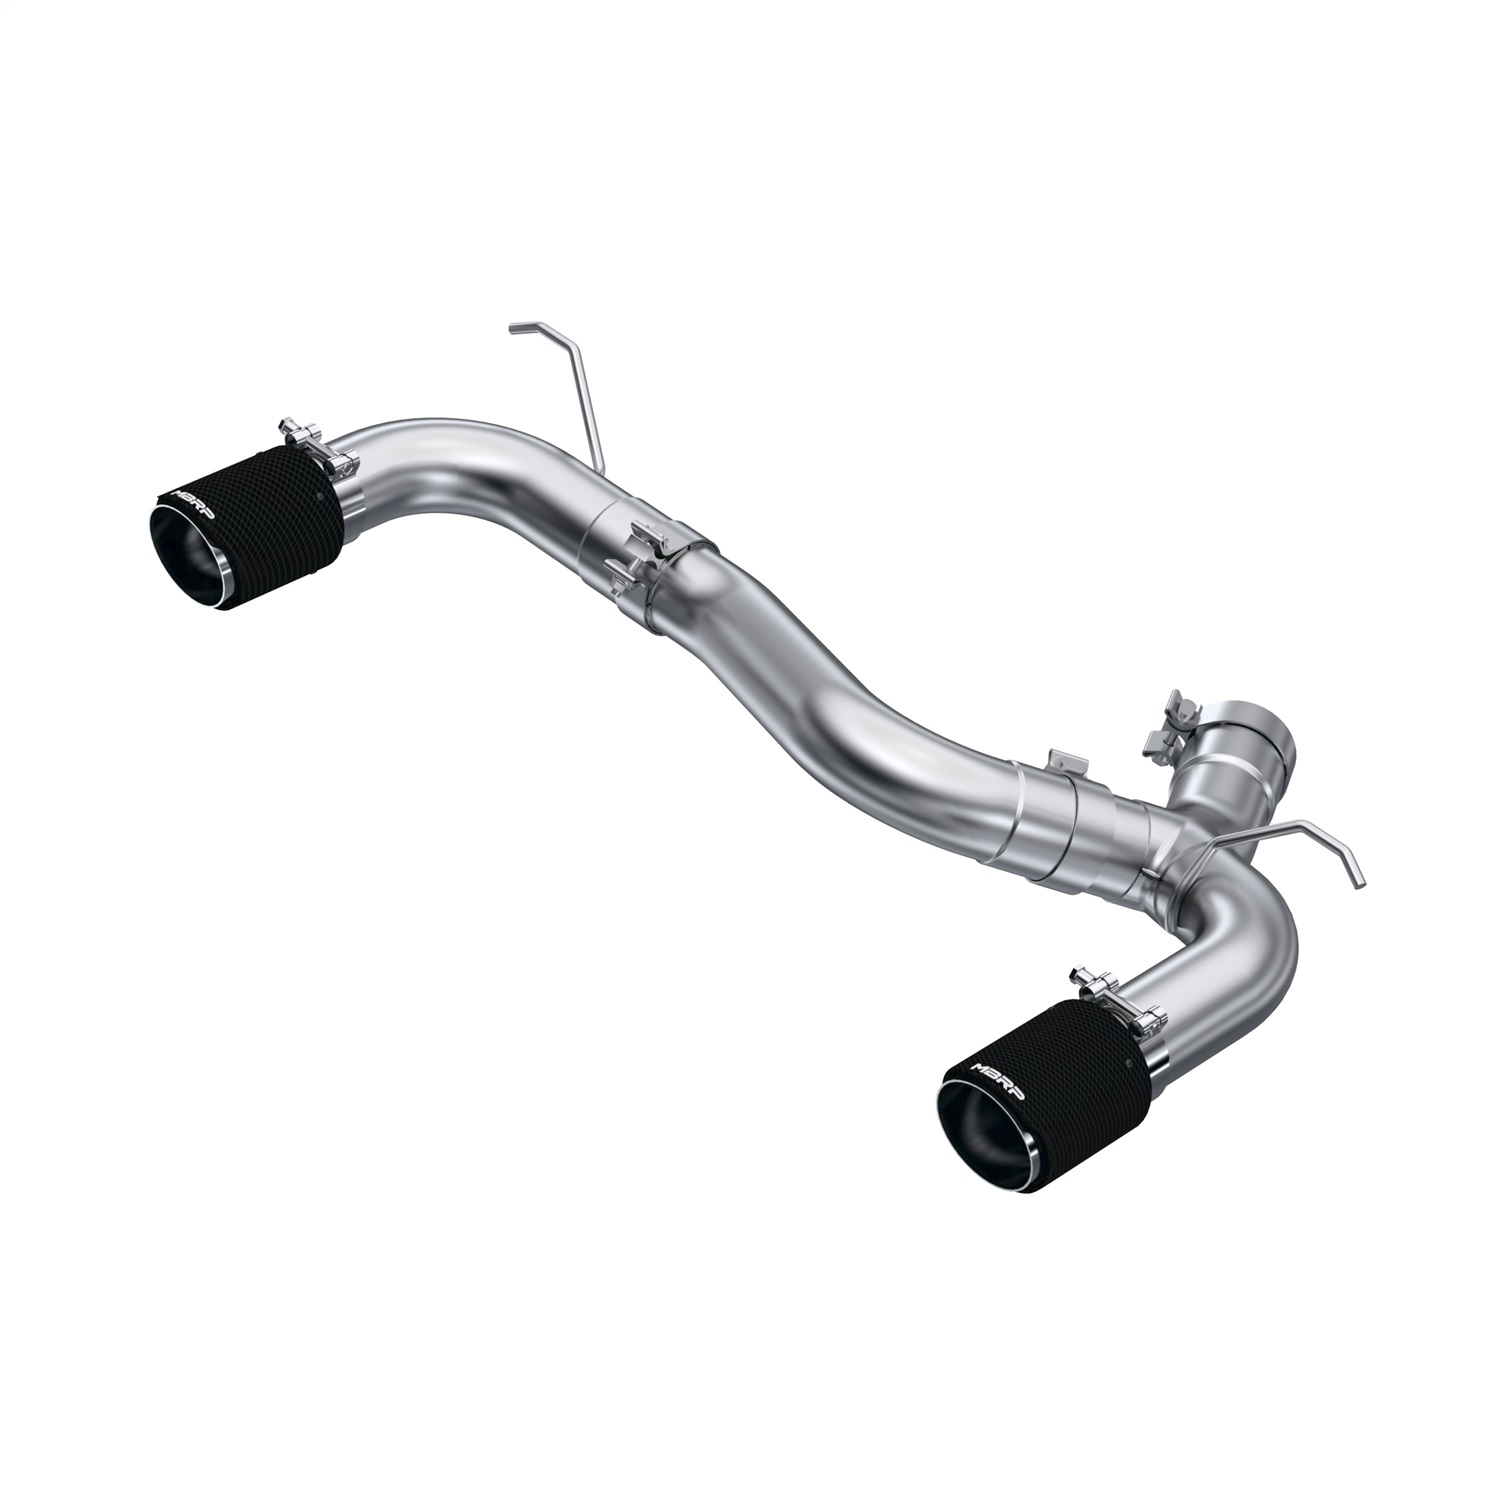 MBRP Exhaust S45003CF Armor Pro Axle Back Exhaust System Fits 17-21 M240i